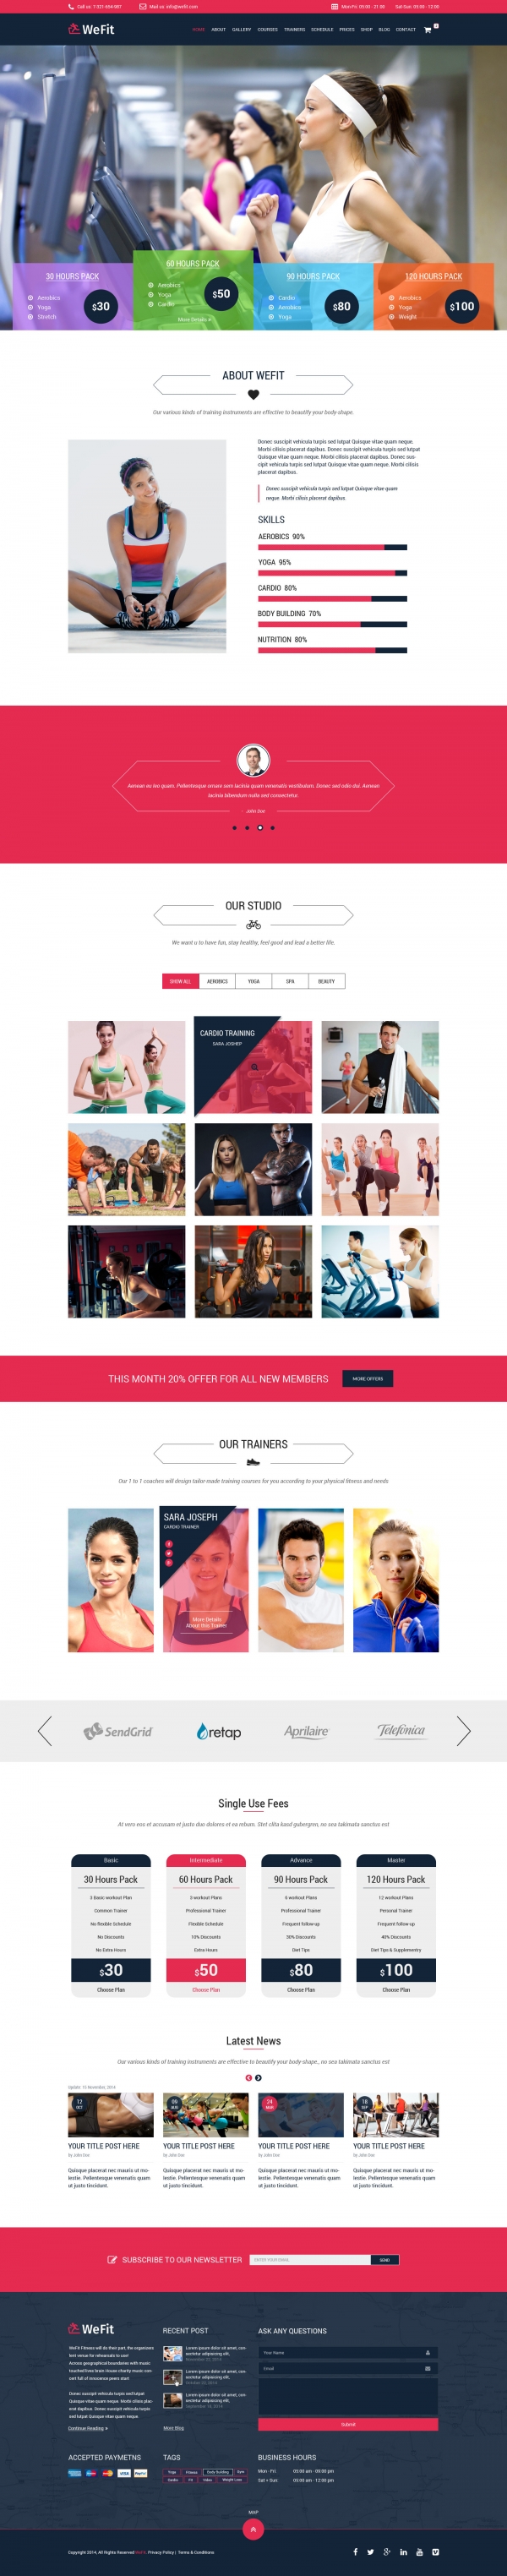 Vina Wefit - Health, Sport, Gyms and Trainers Template